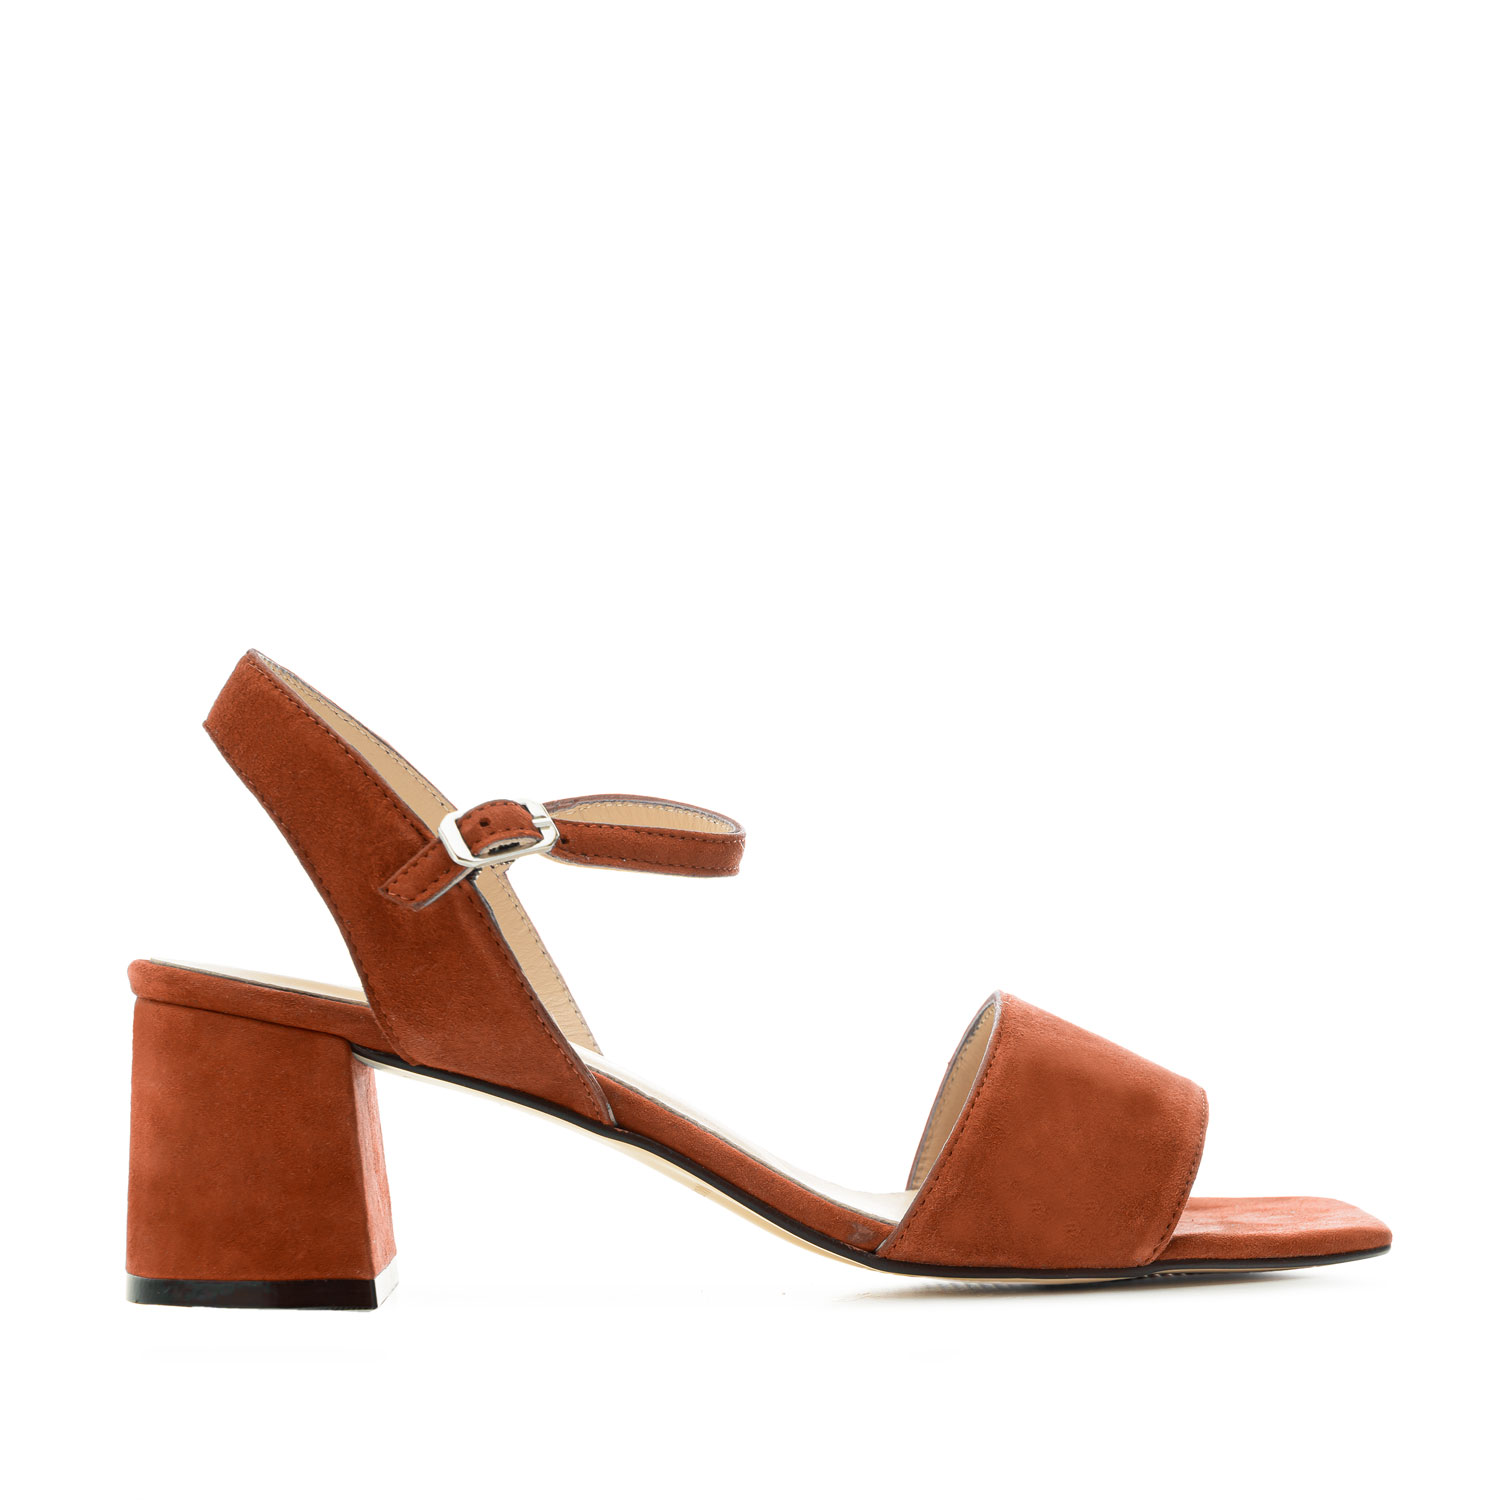 Block-heeled Sandals in Brick Red Suede Leather 